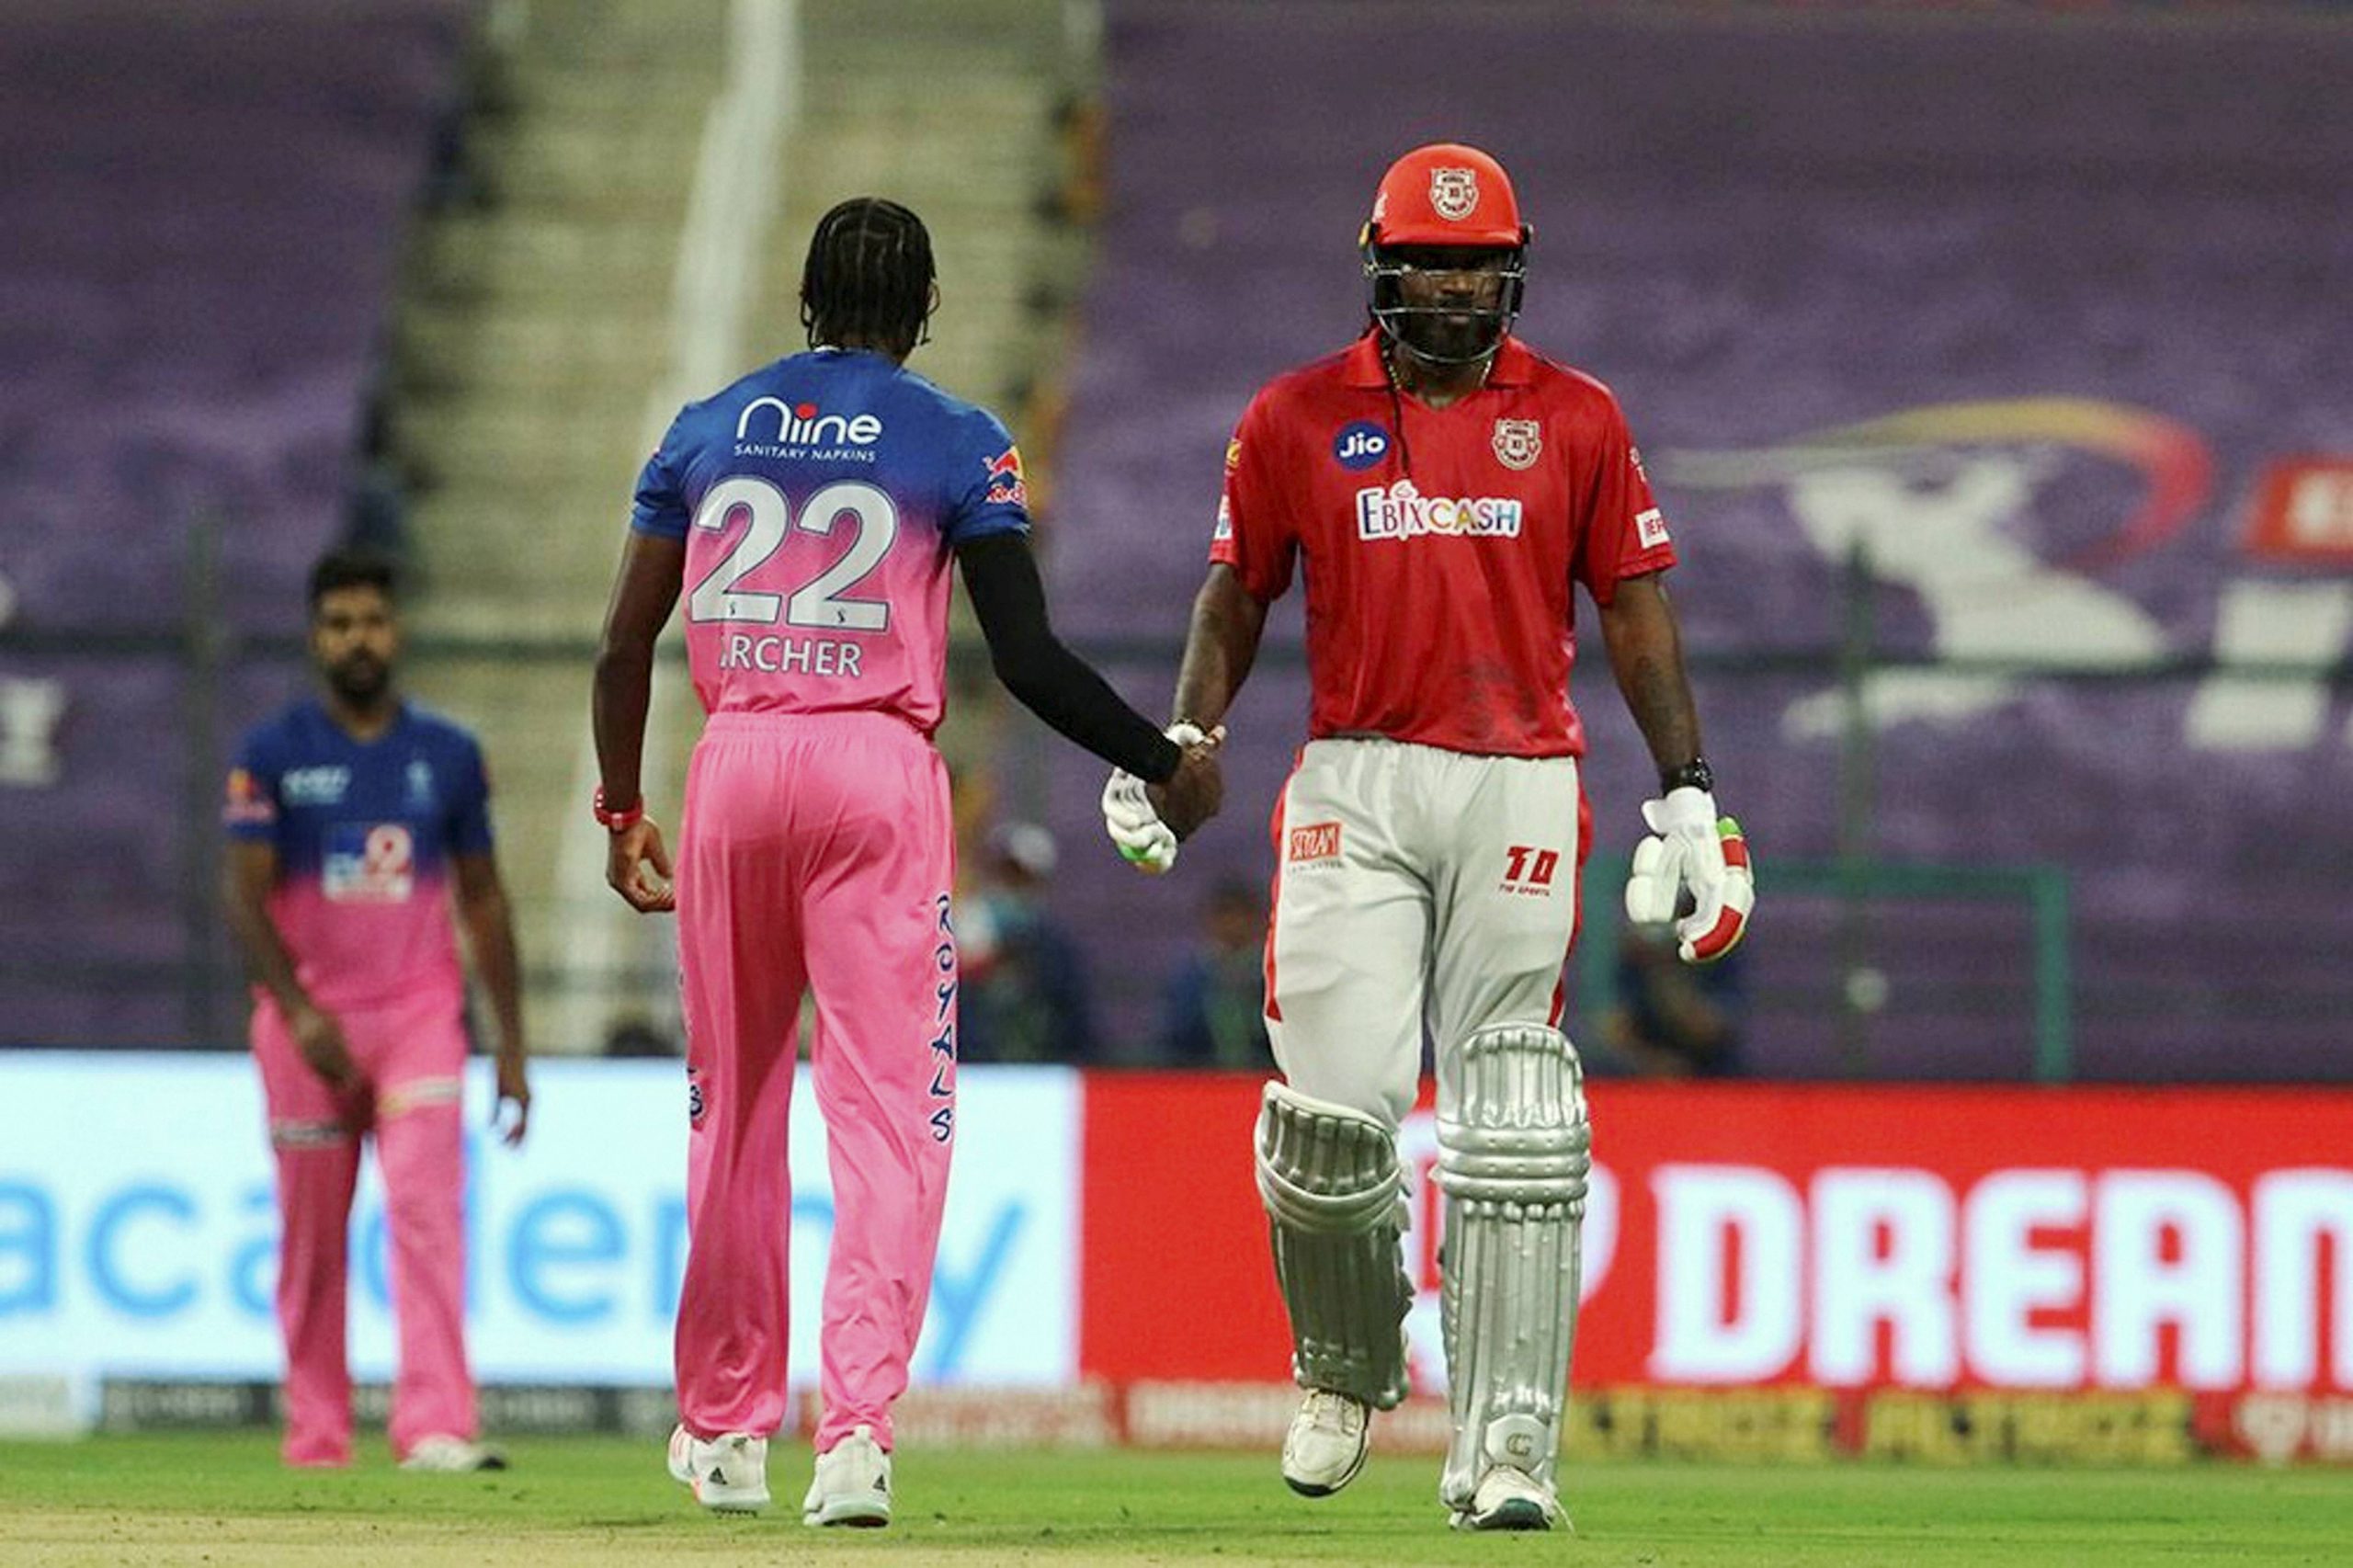 Chris Gayle fined for throwing bat in anger after he missed century by 1 run